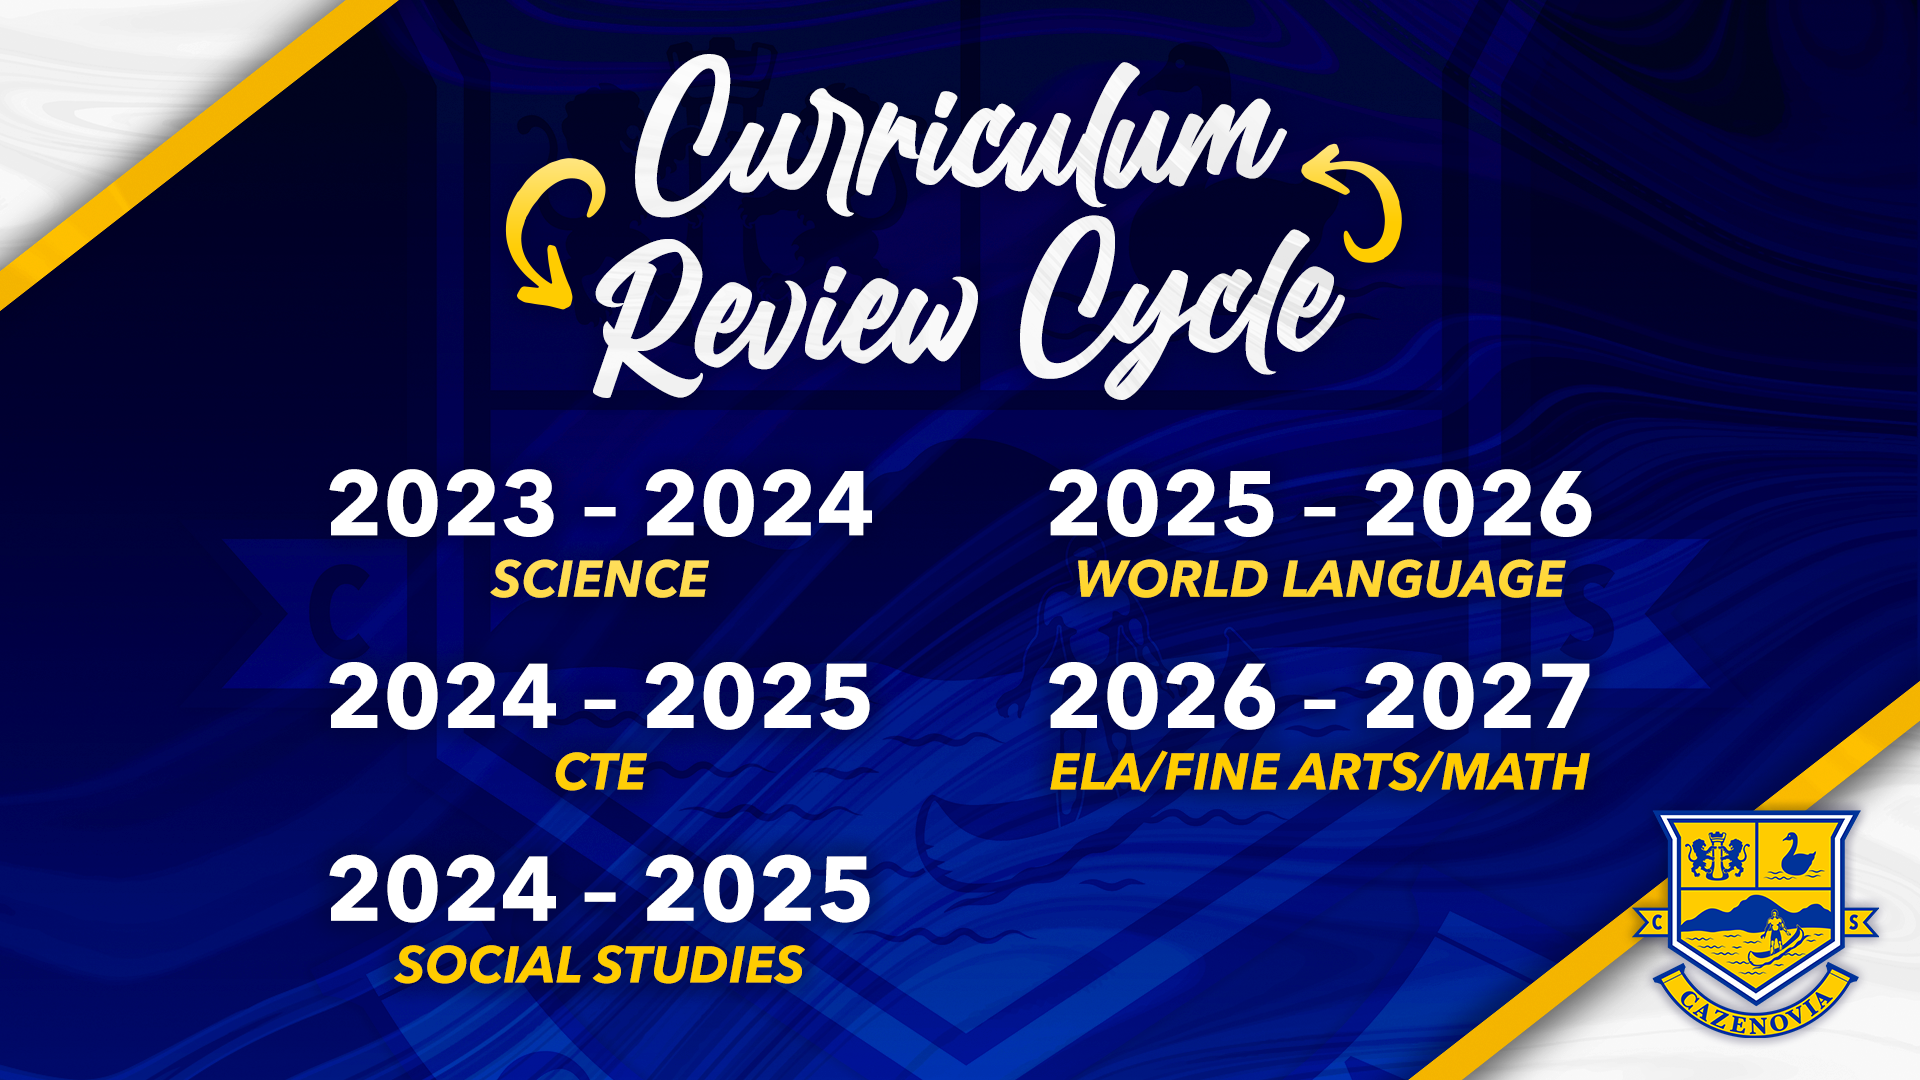 Curriculum Review Cycle